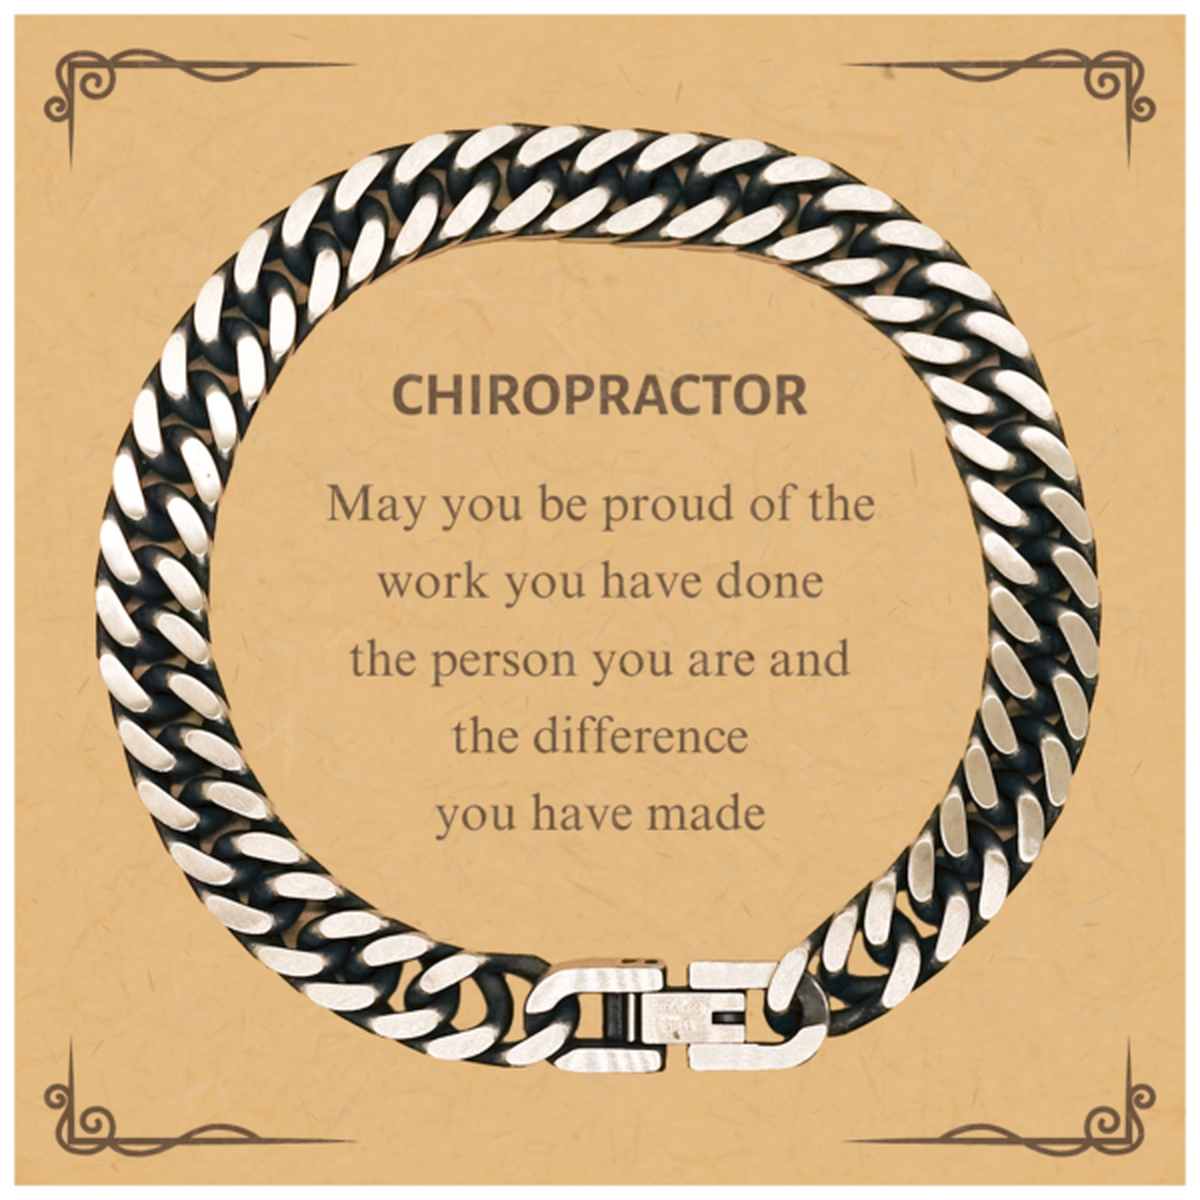 Chiropractor May you be proud of the work you have done, Retirement Chiropractor Cuban Link Chain Bracelet for Colleague Appreciation Gifts Amazing for Chiropractor